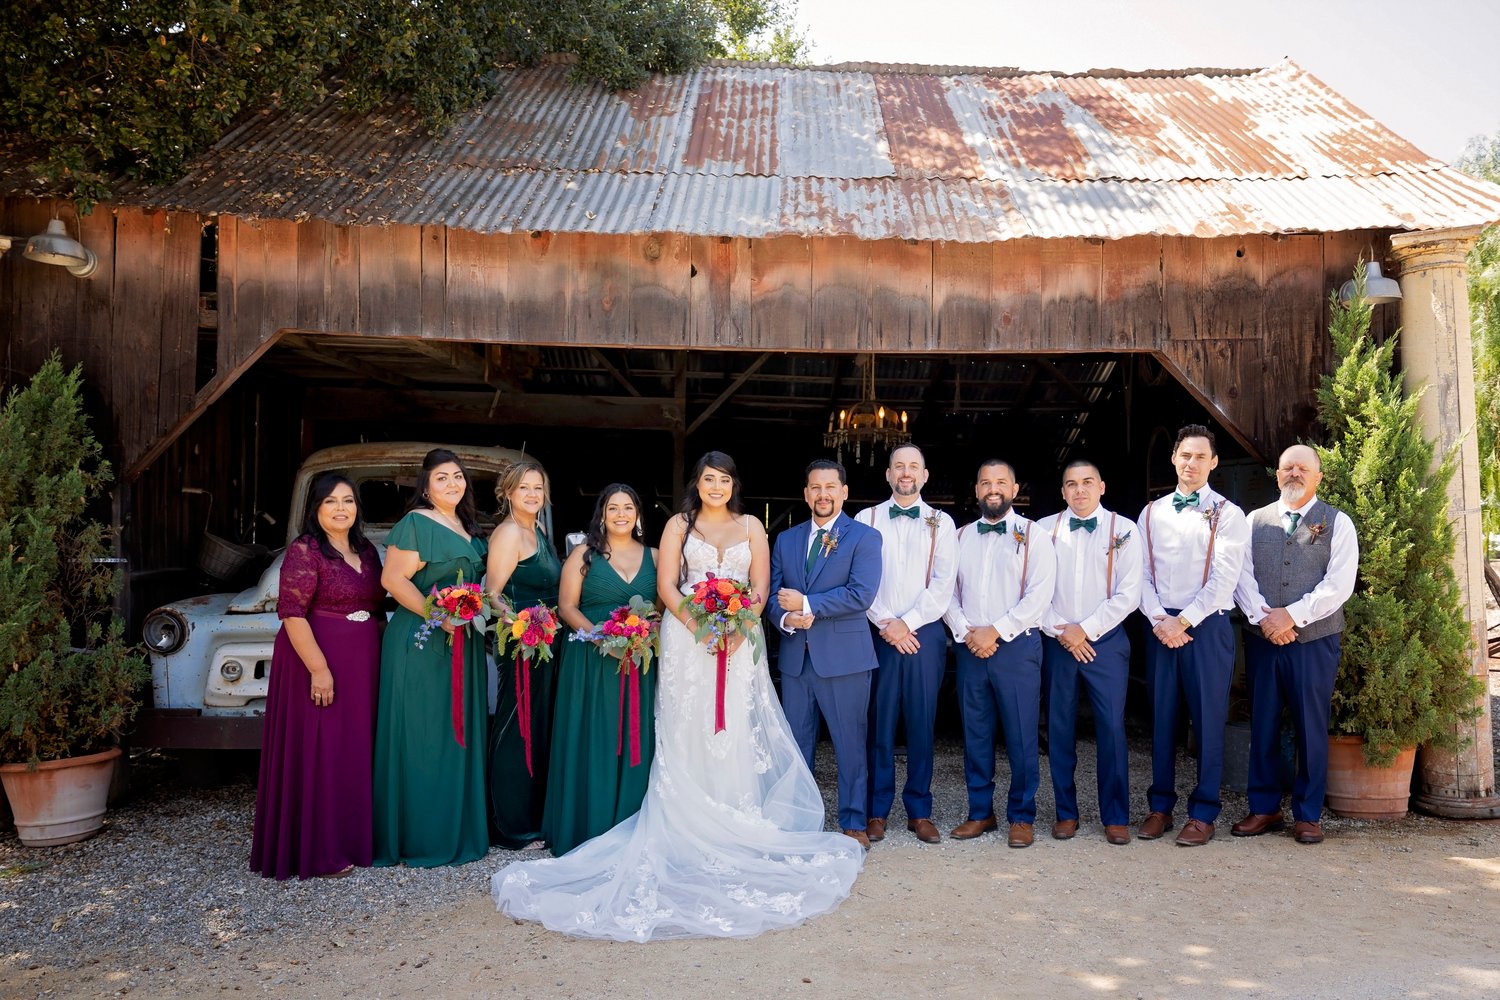 bride and groom pose with the wedding party in front of an open barn